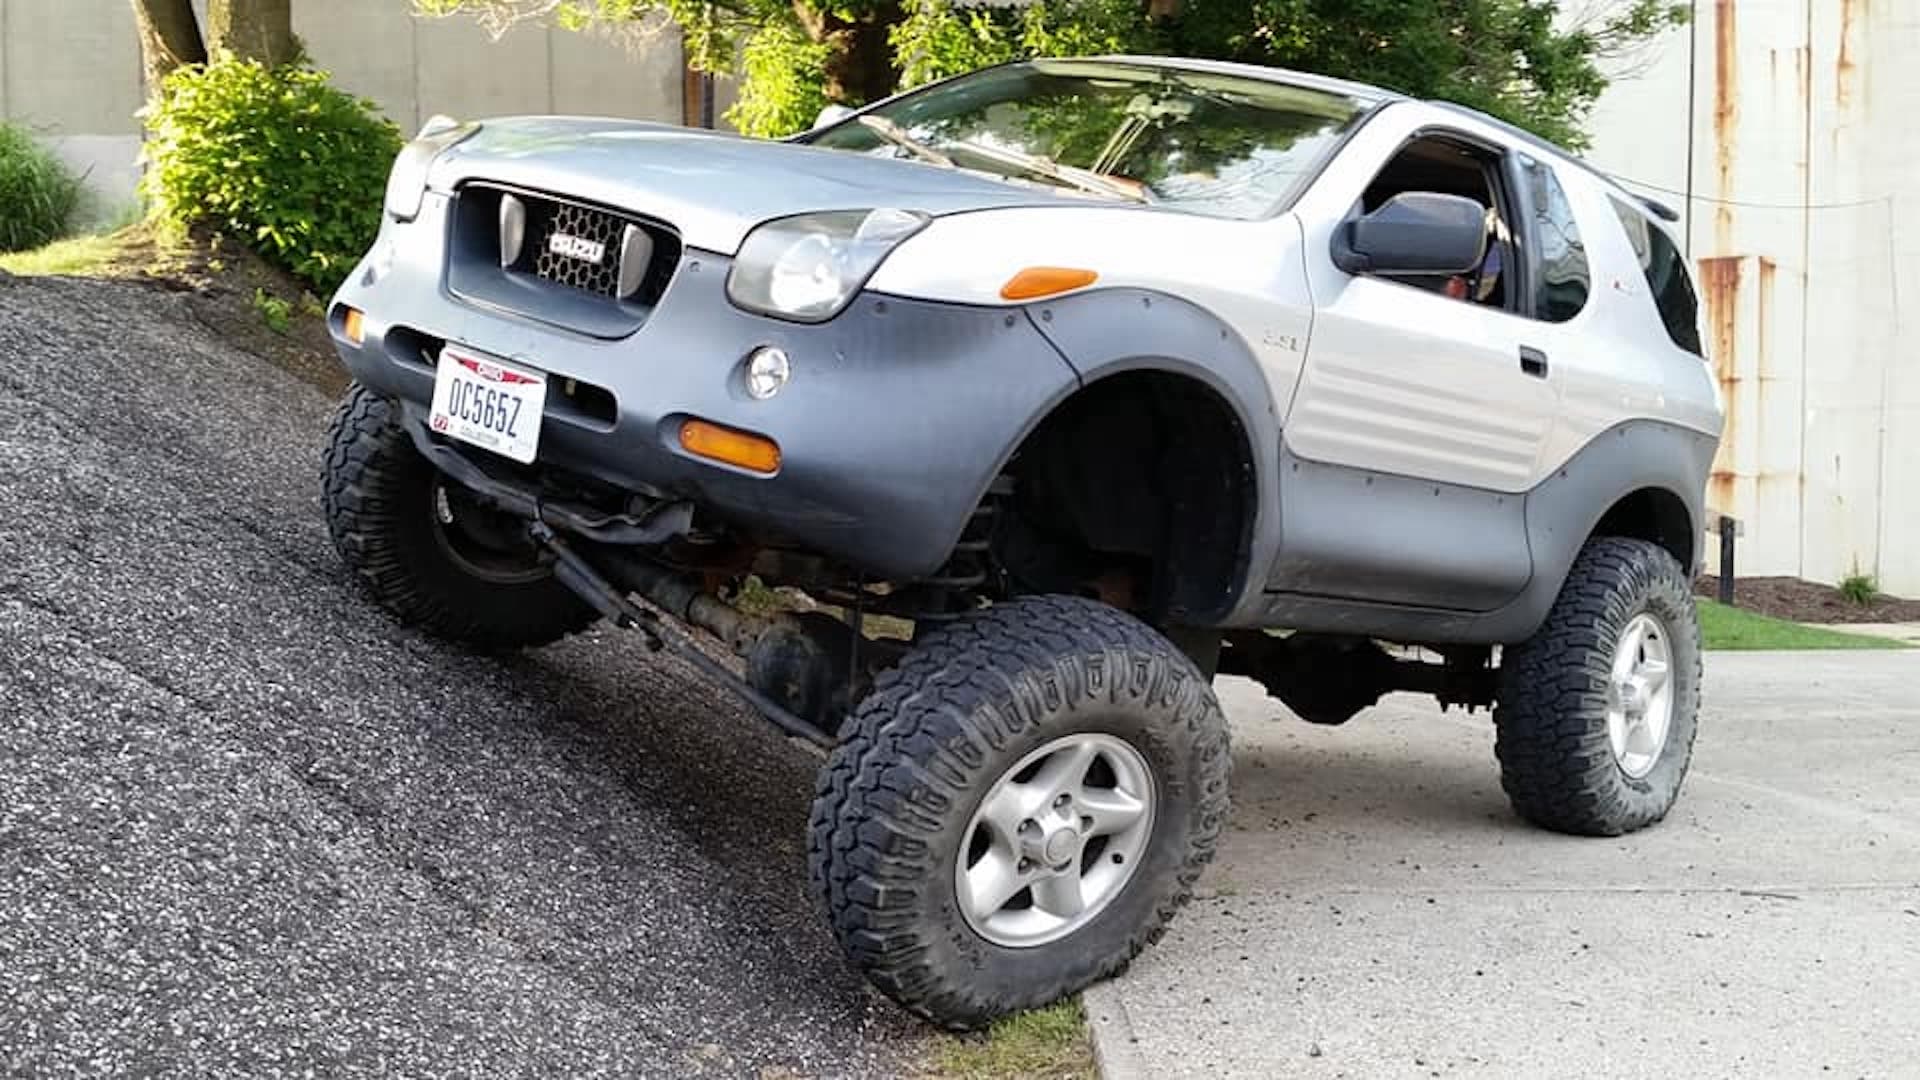 This Lifted 1999 Isuzu Vehicross Has What the Original Always Needed—A V8